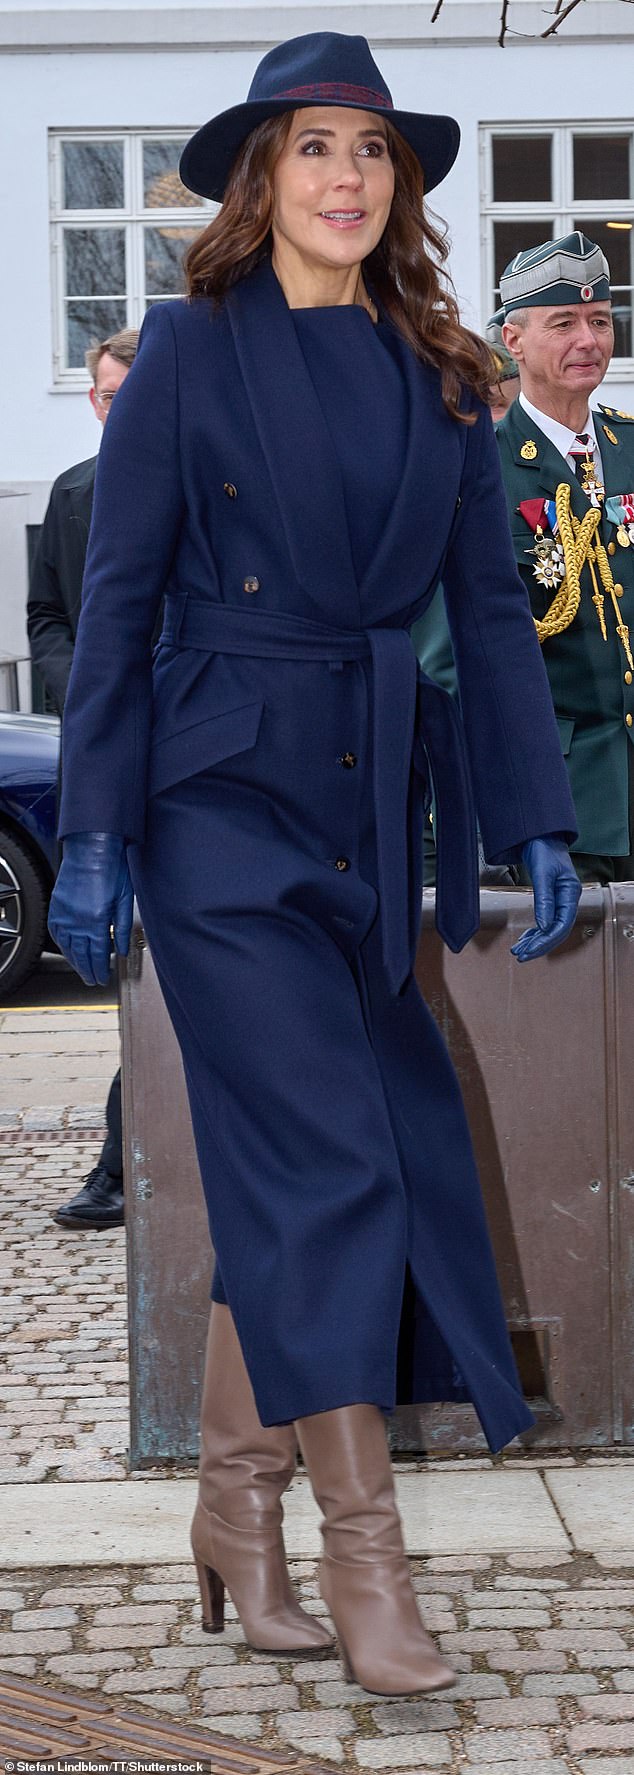 Queen Mary, 52, donned a long, elegant trench coat which she tied at the waist to show off her slender and sophisticated figure.